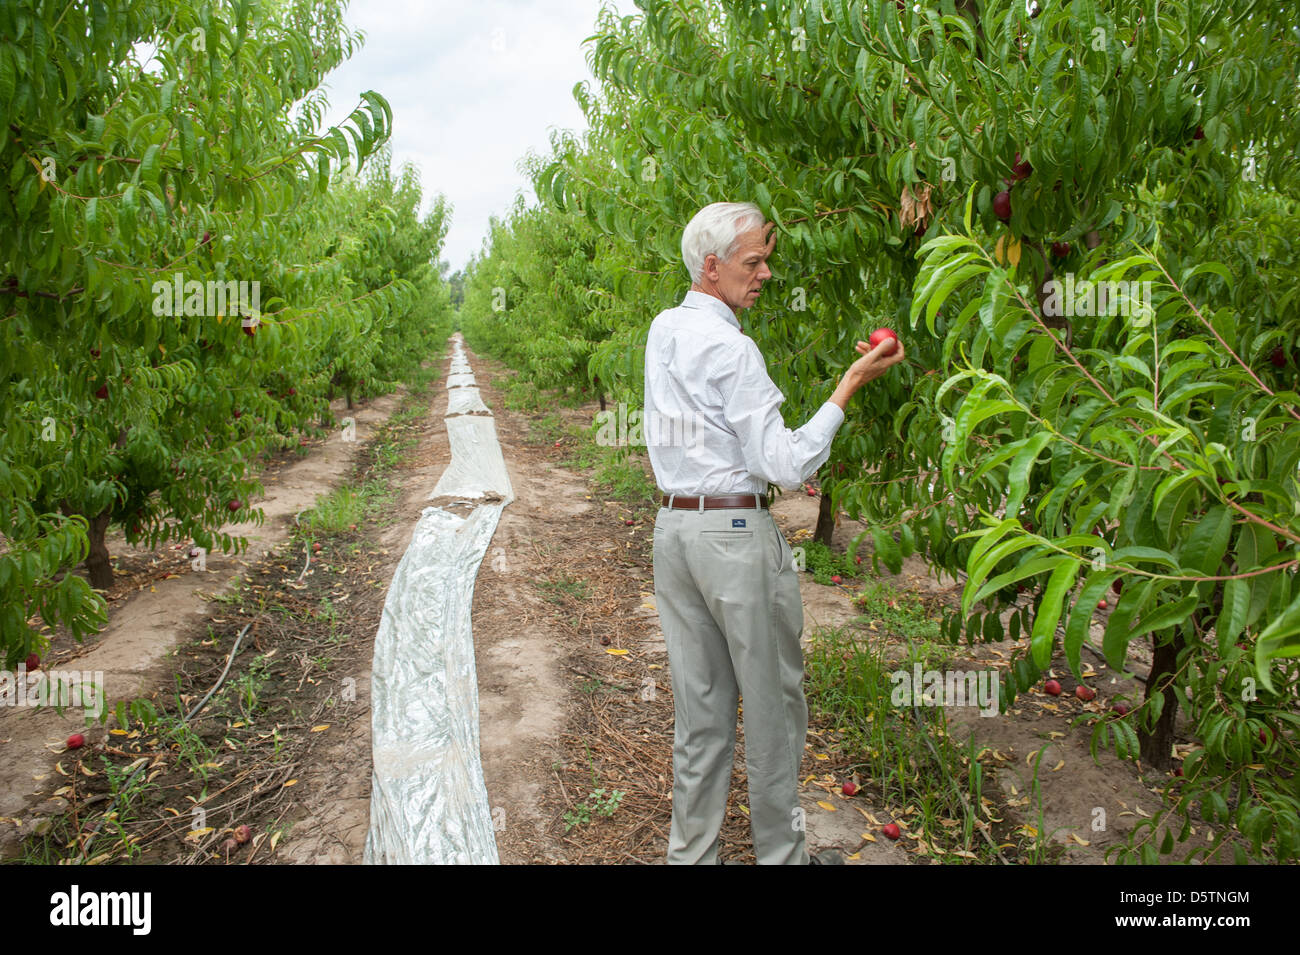 Man picking fruit on tour on a fruit farm in Chile, South America  Stock Photo